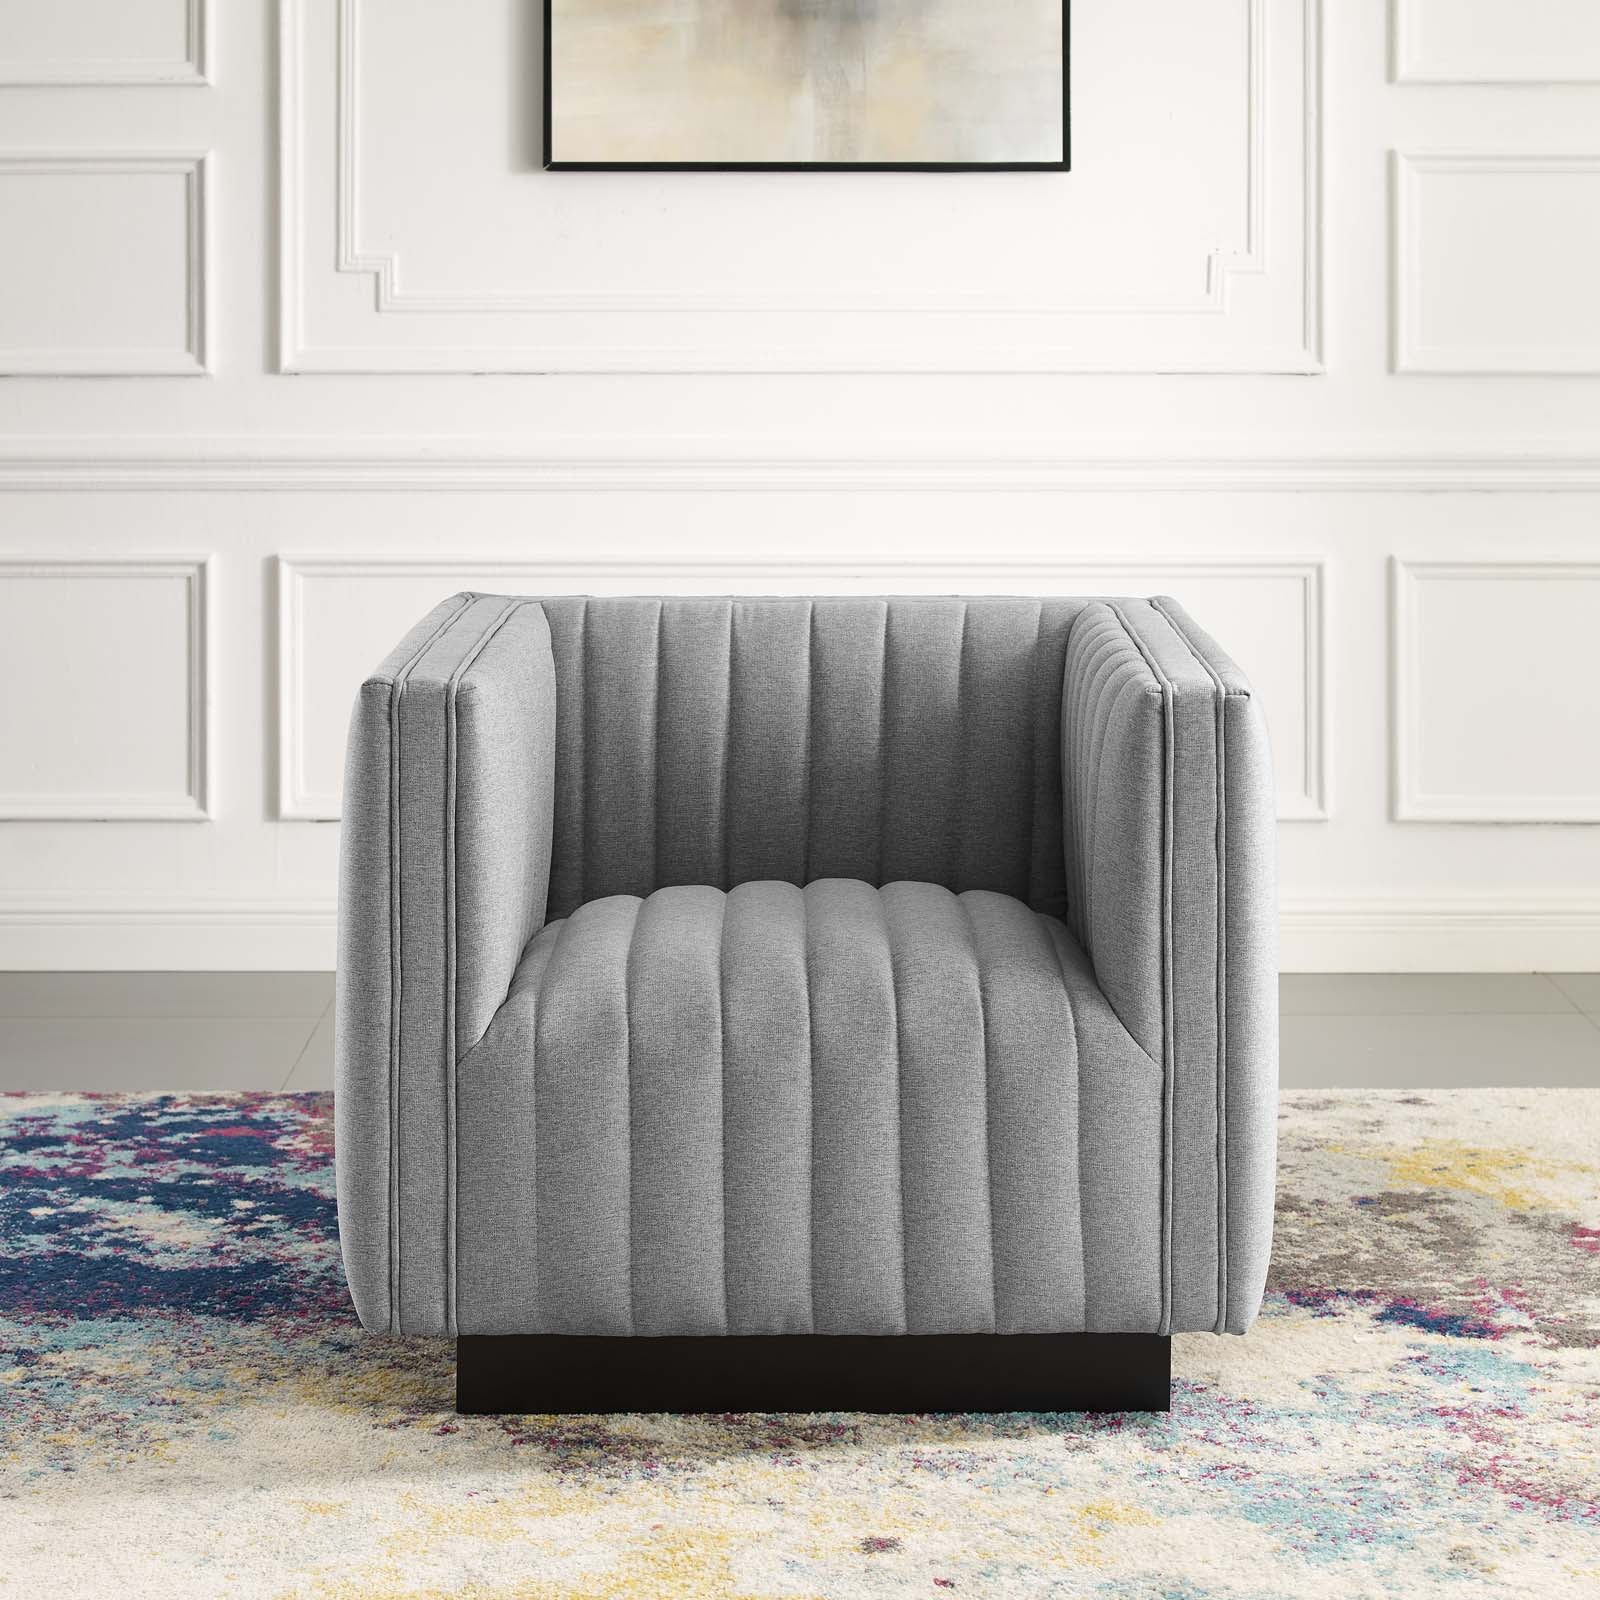 Modway Accent Chairs - Conjure Tufted Upholstered Fabric Armchair Light Gray